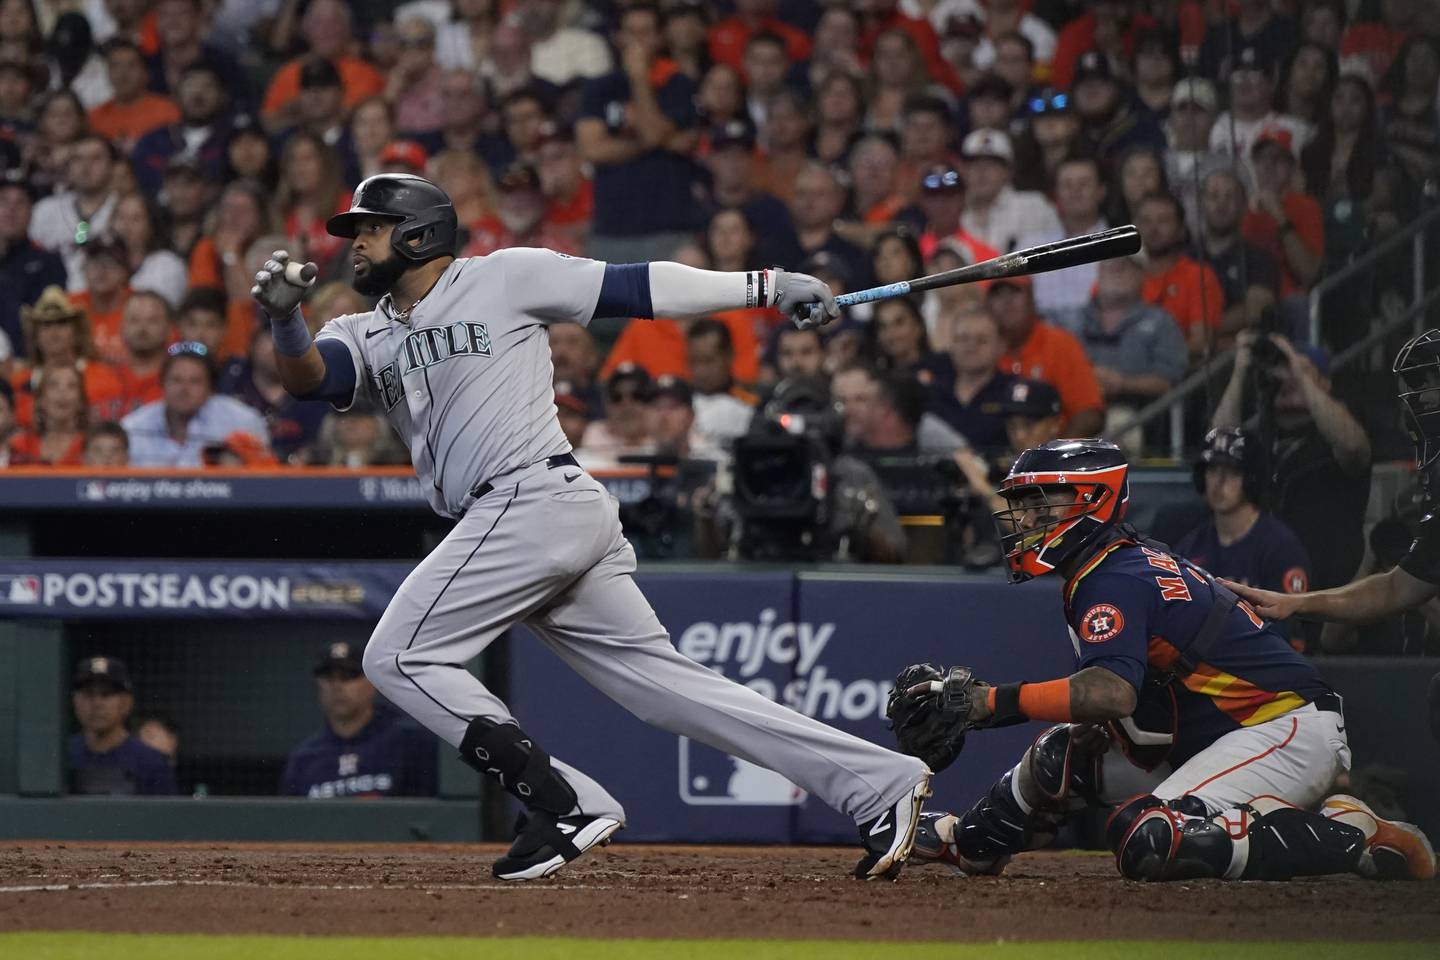 The Mariners' Carlos Santana hits against the Astros to score a run during the fourth inning of a playoff game on Oct. 13, 2022.